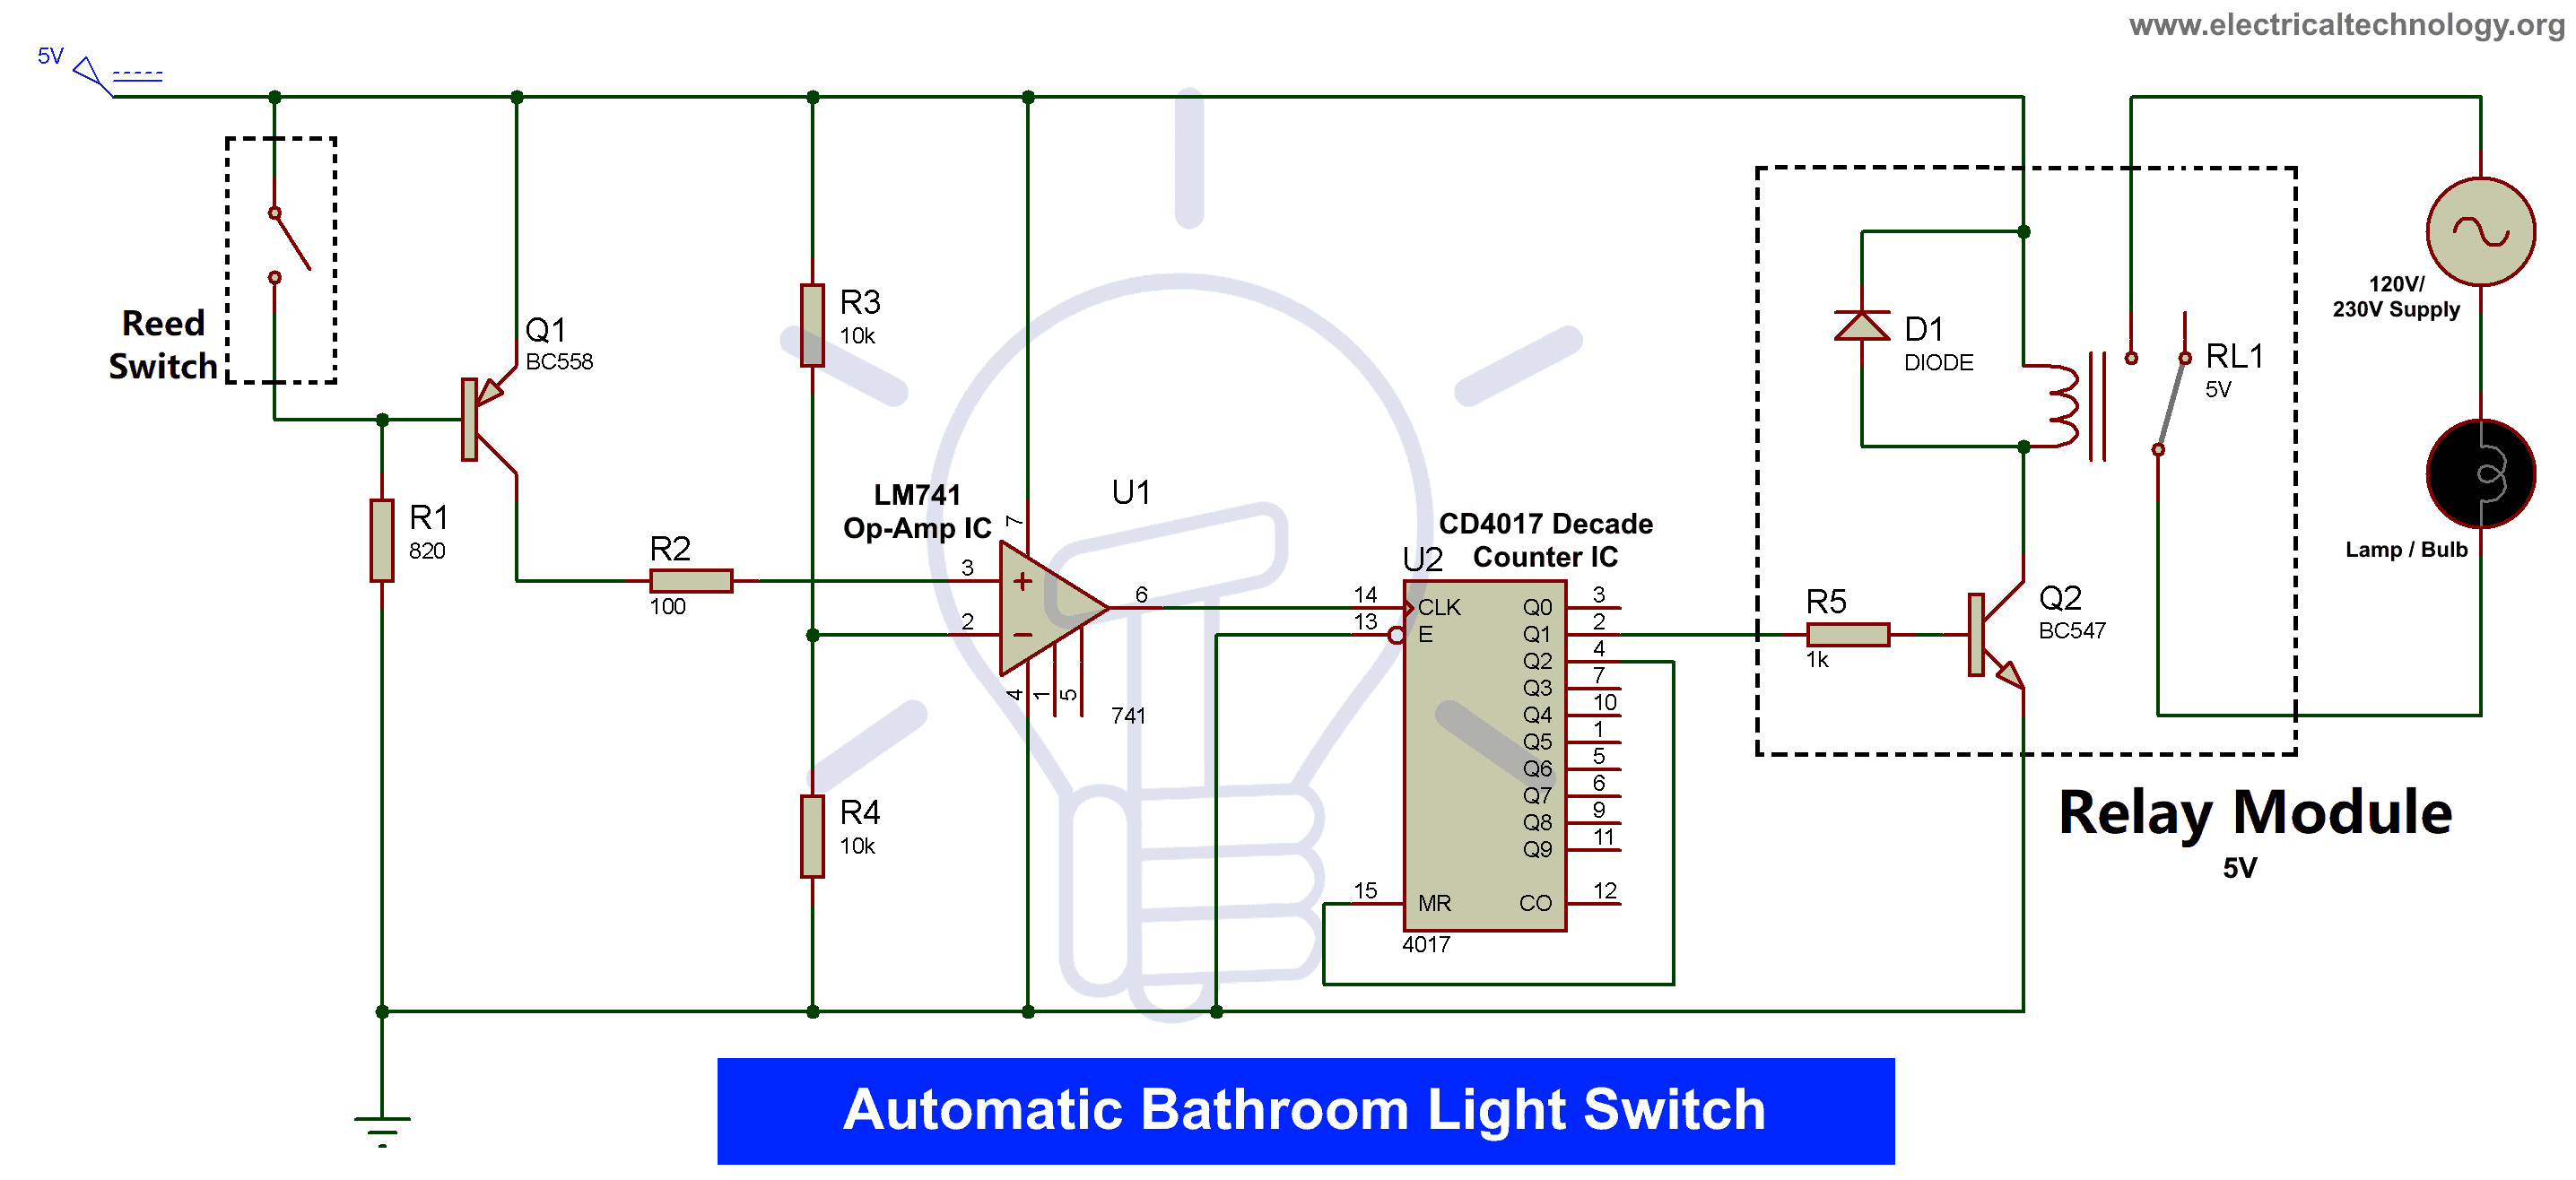 Automatic Bathroom Light Switch Circuit Diagram and Operation